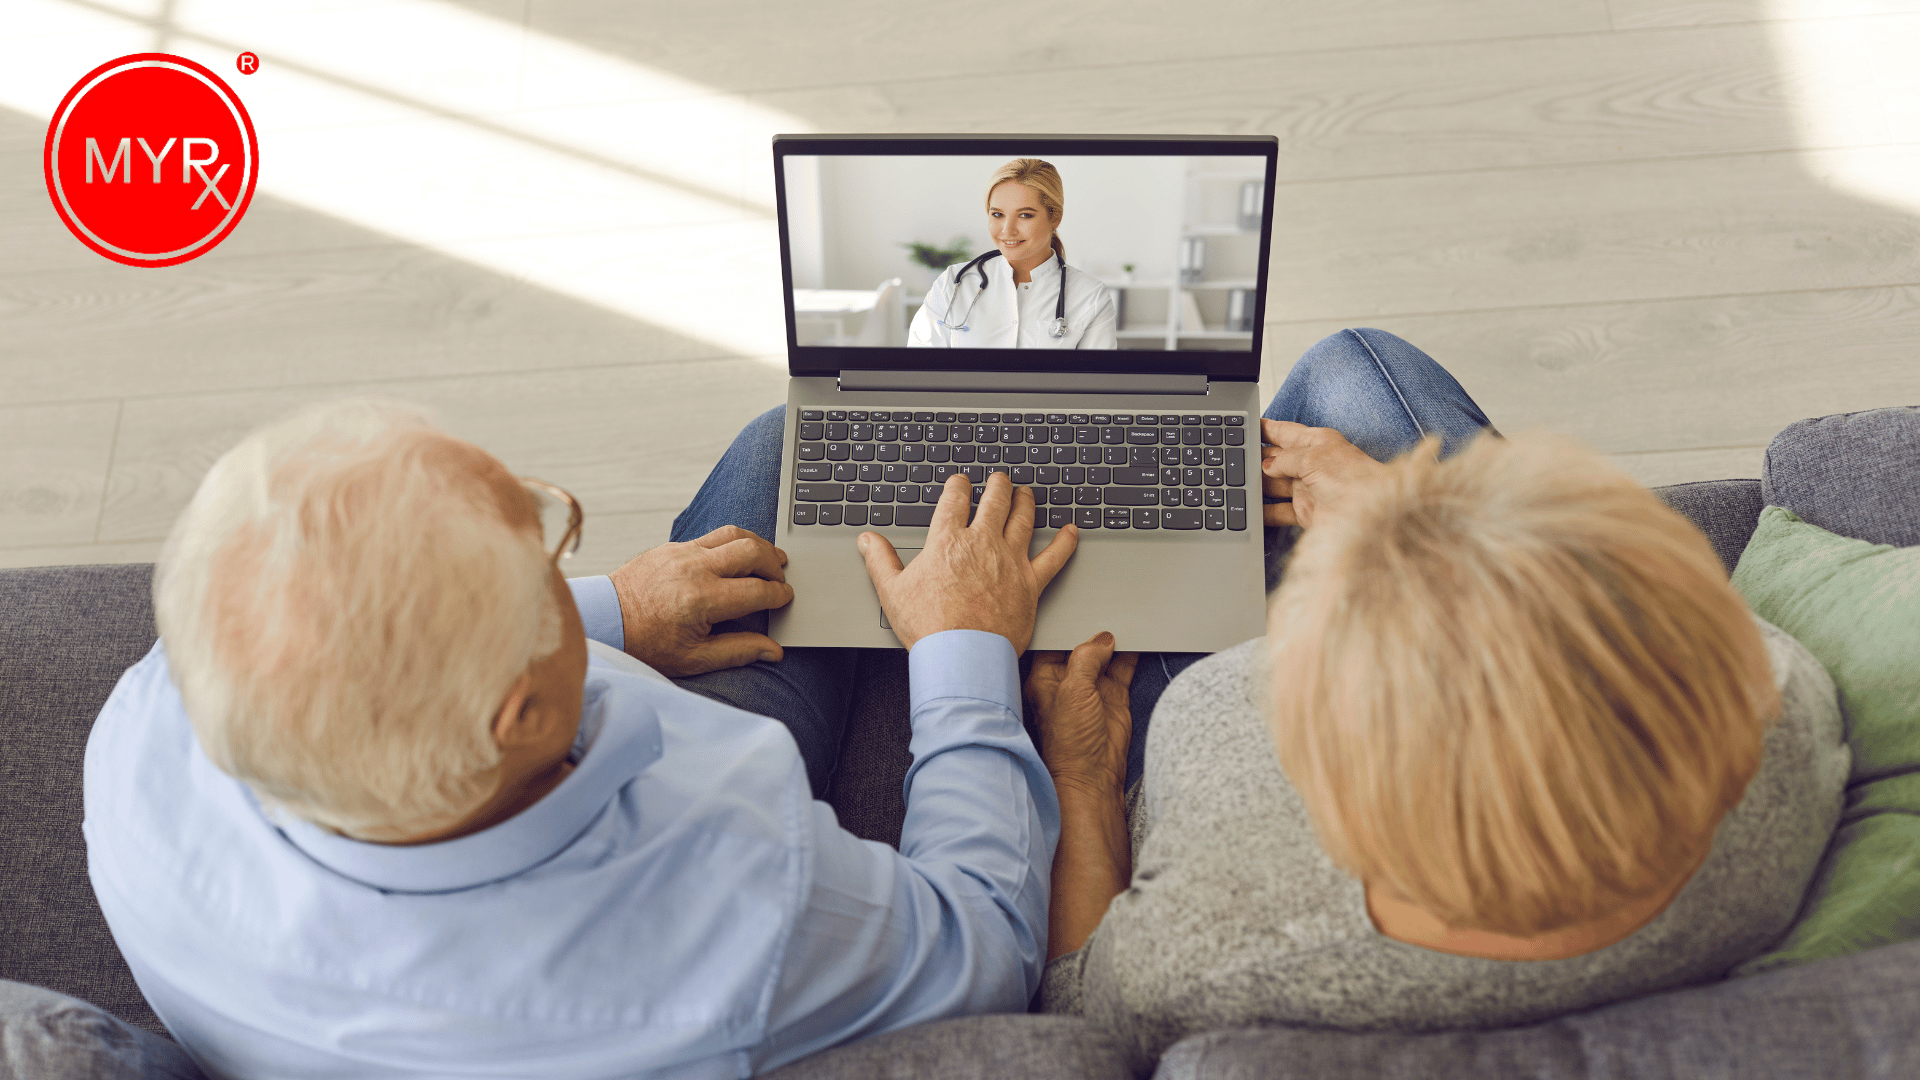 telemedicine-in-rural-healthcare-overcoming-challenges-and-expanding-access